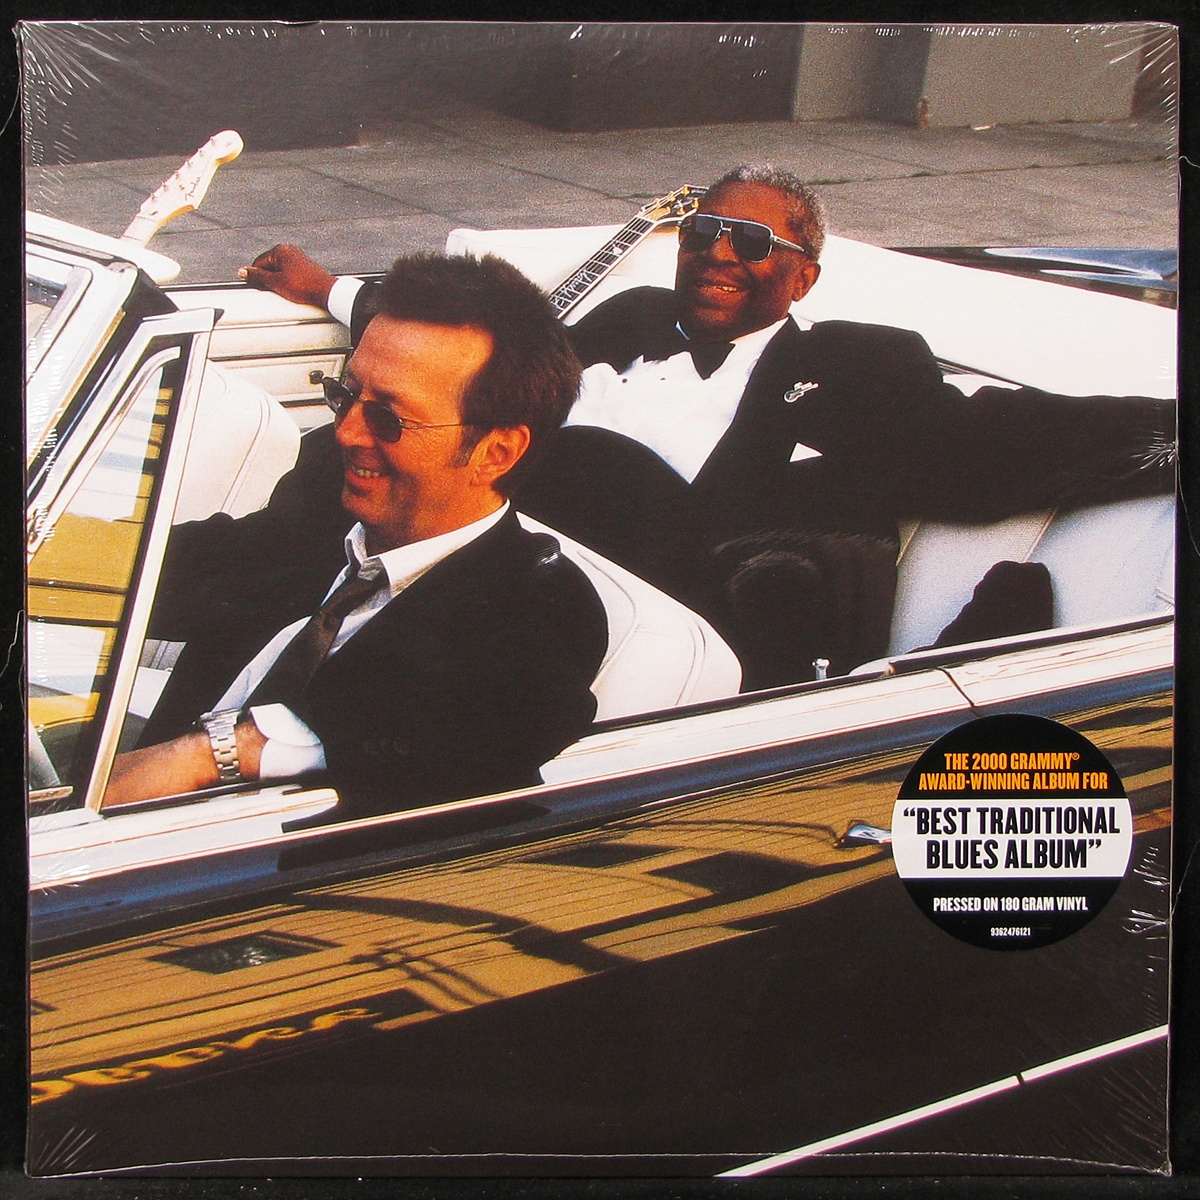 LP B.B. King / Eric Clapton — Riding With The King (2LP) фото